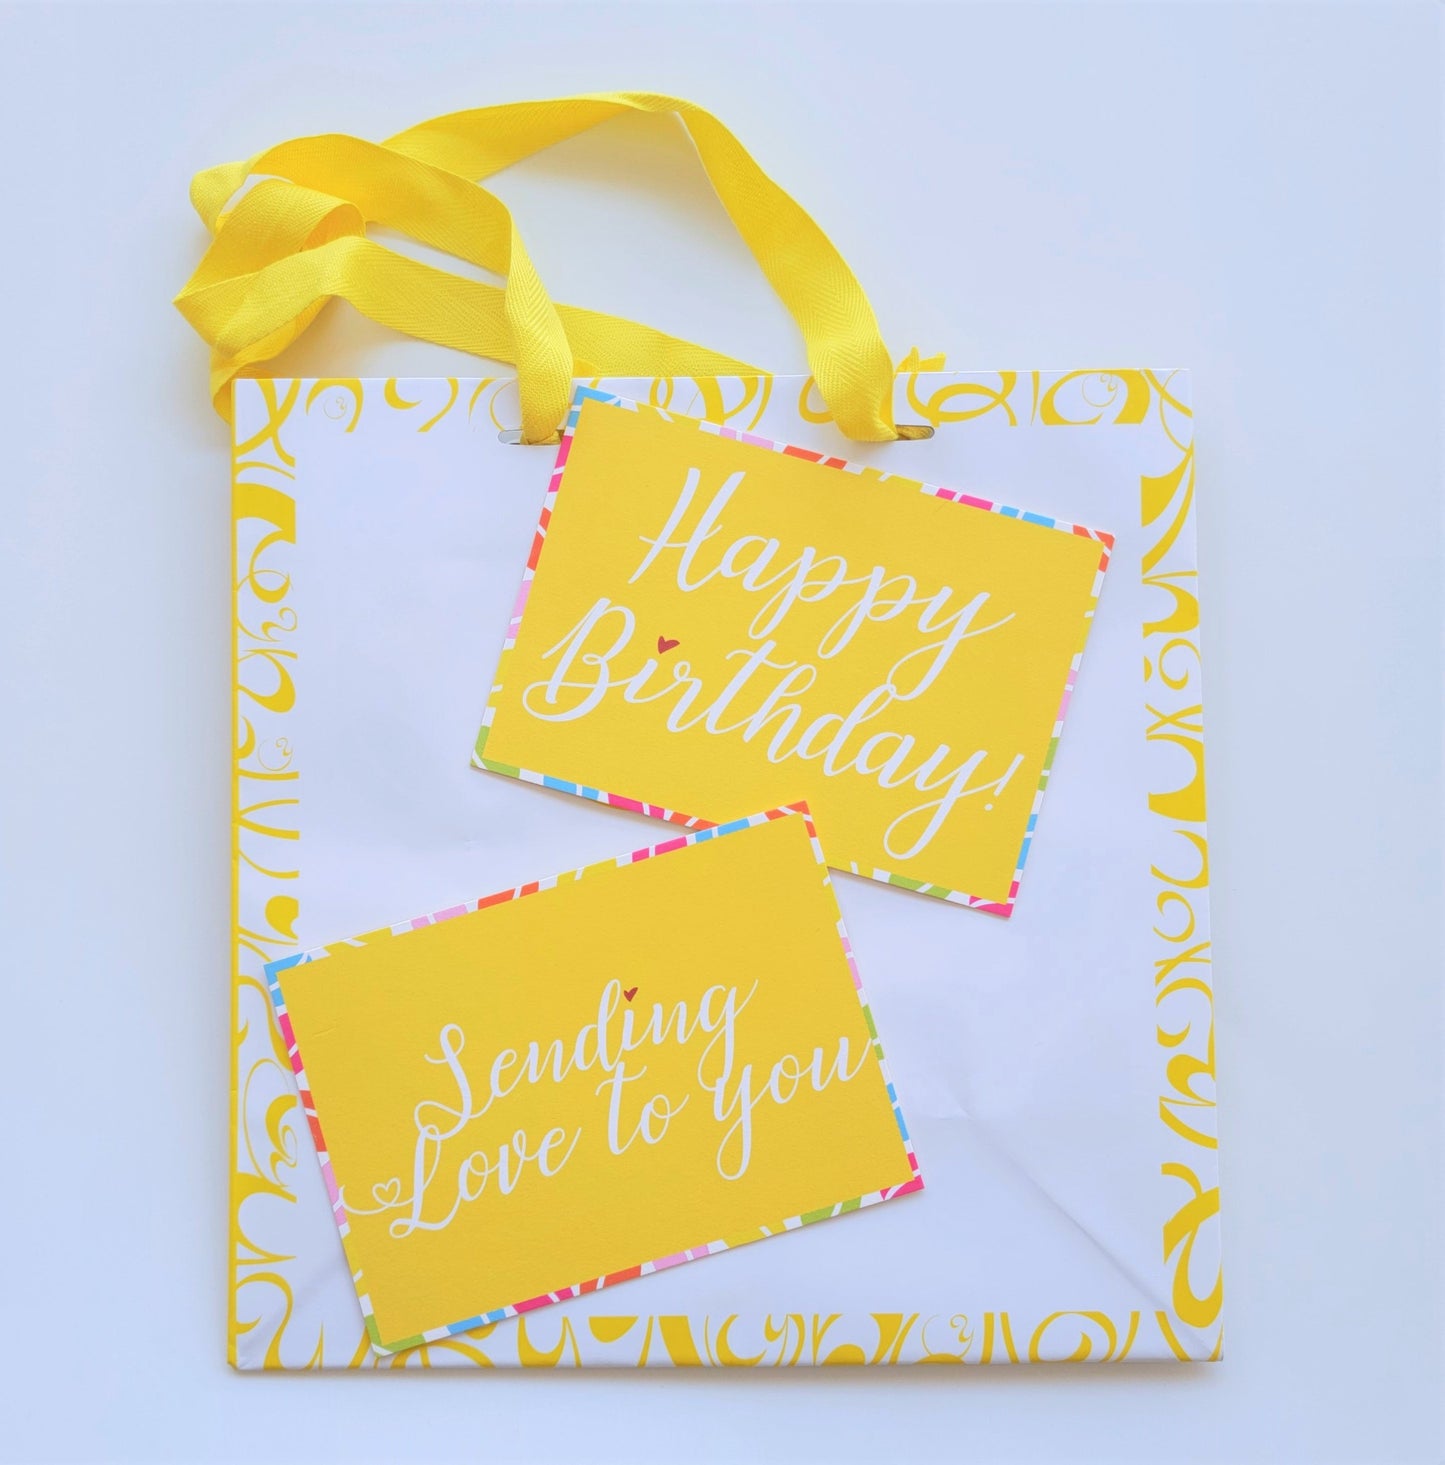 Cards to write your personal message - Yann Haute Patisserie, French desserts and bakery shop in Calgary. Best pastries like macarons, cakes, birthday cakes, bread, ice cream and almond croissants!